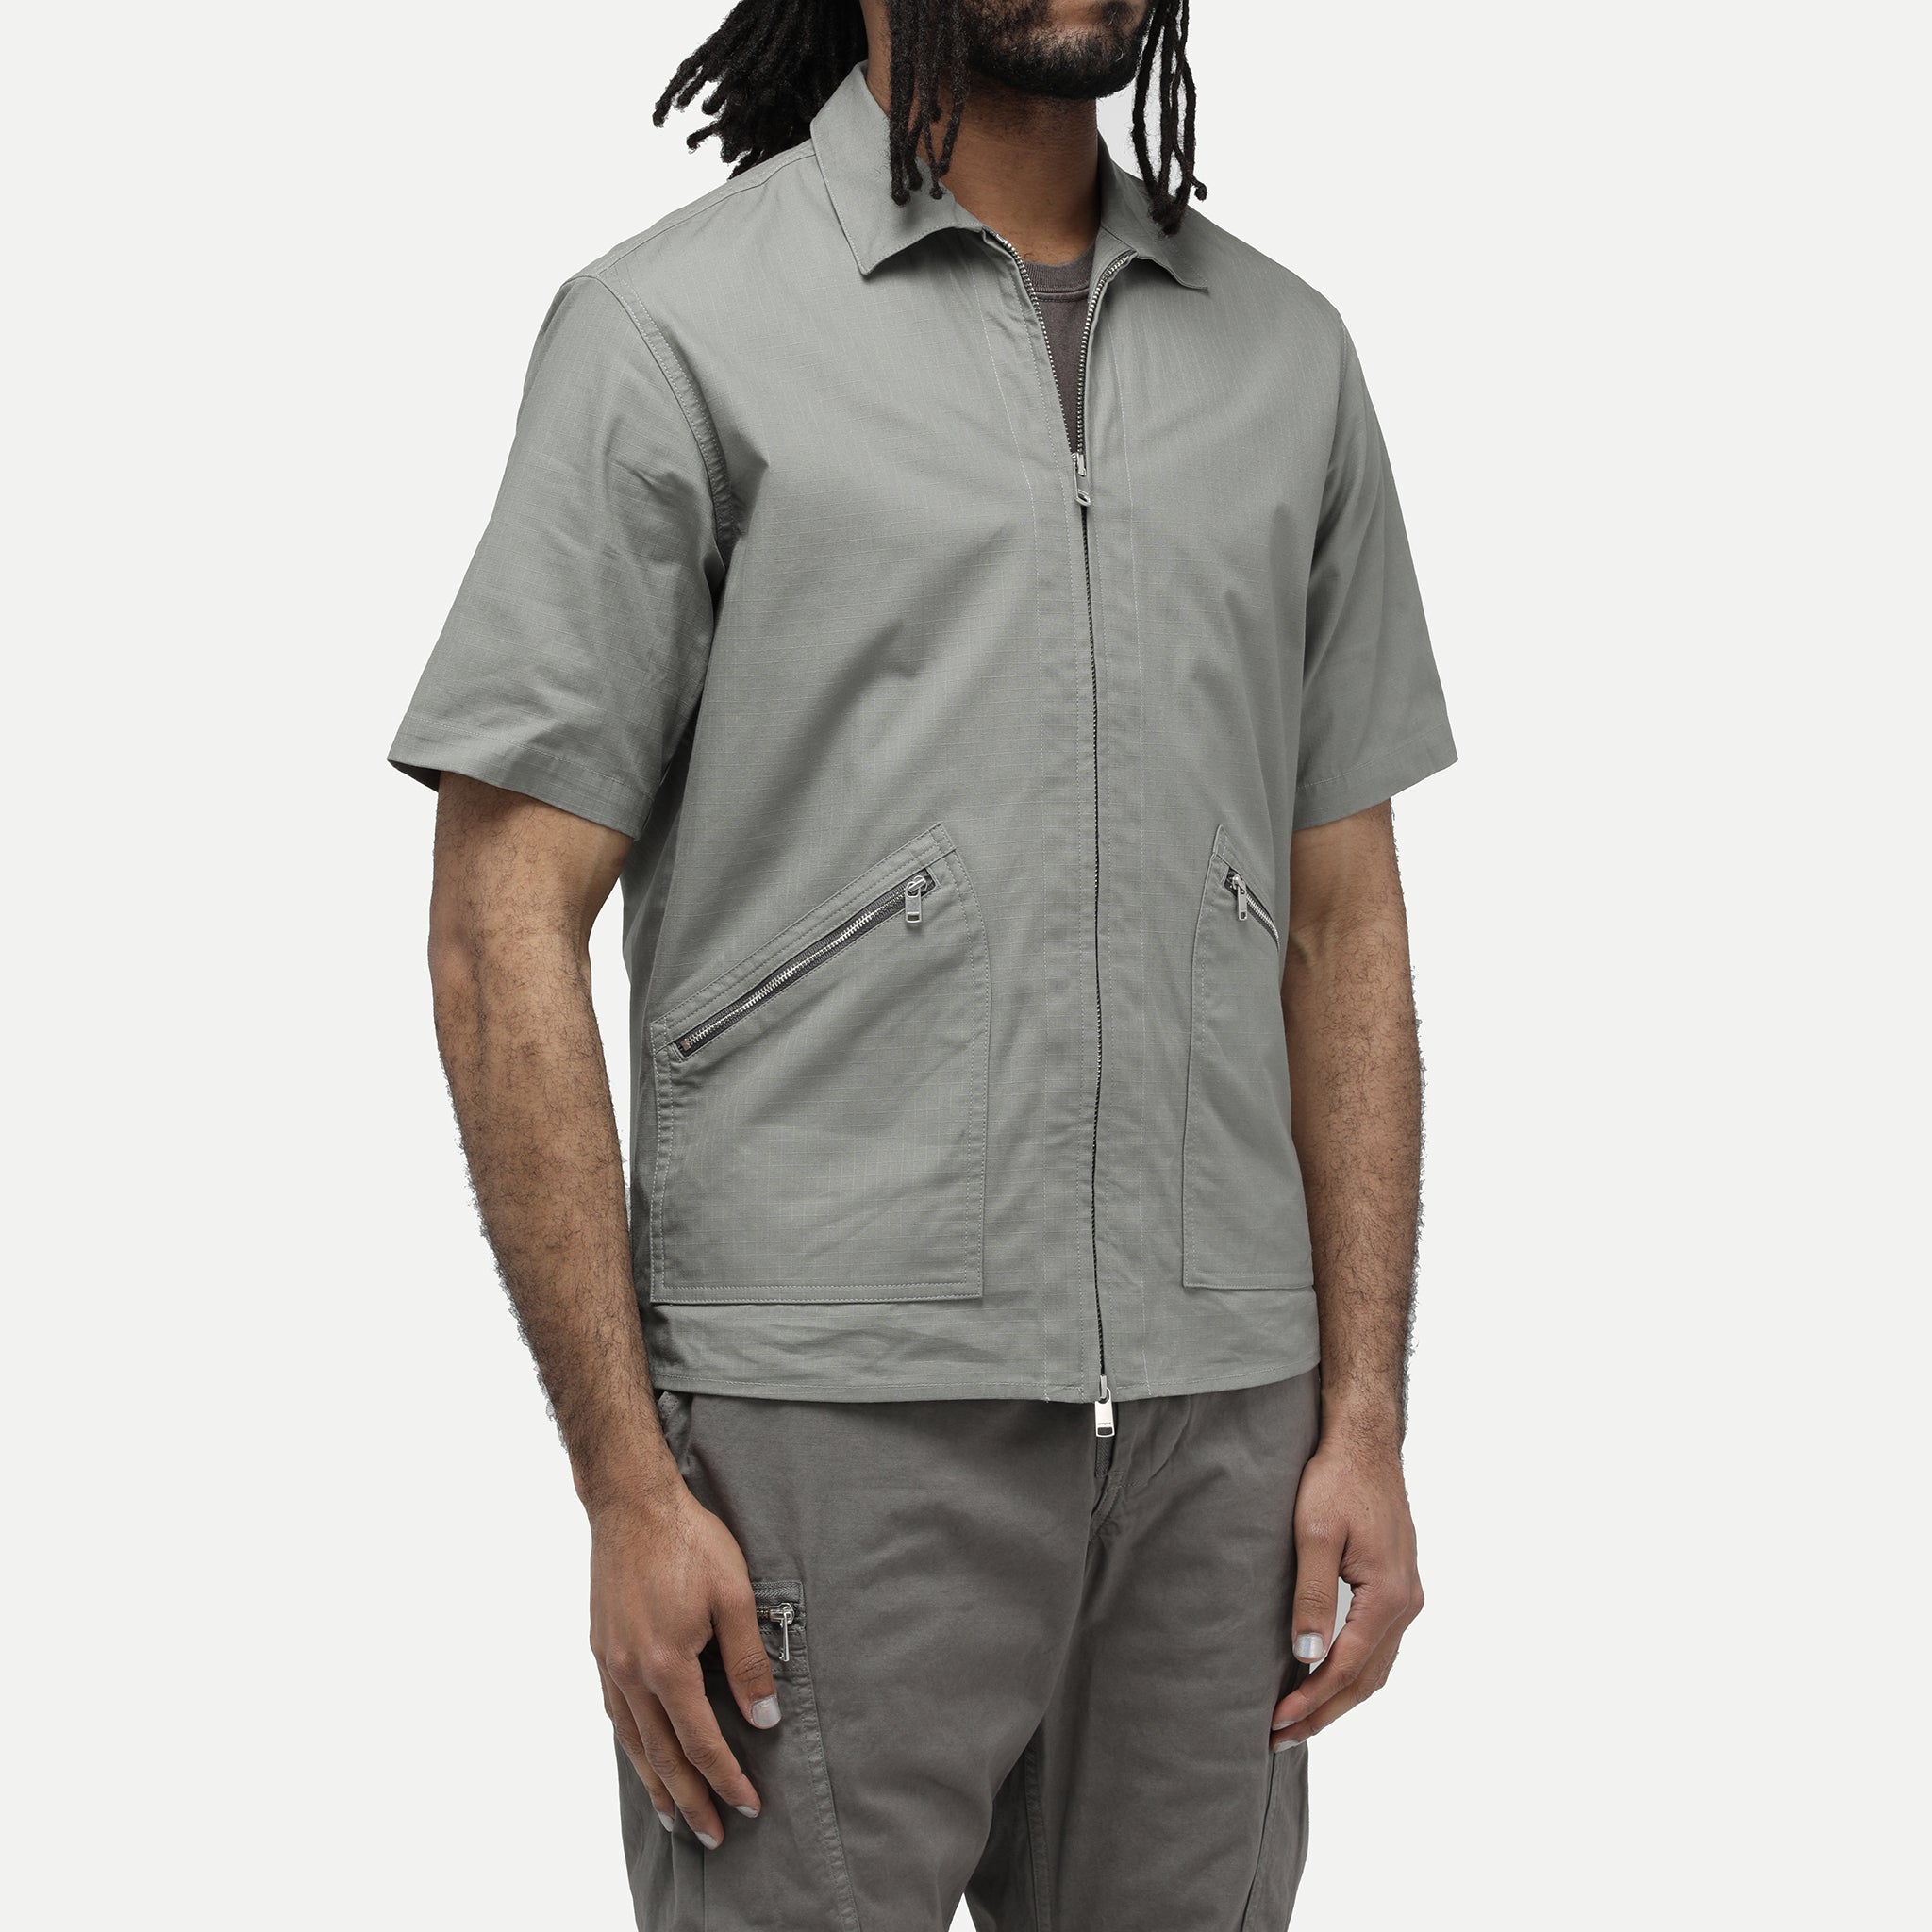 Rancher S/S Shirt Cotton Ripstop – SYSTEM